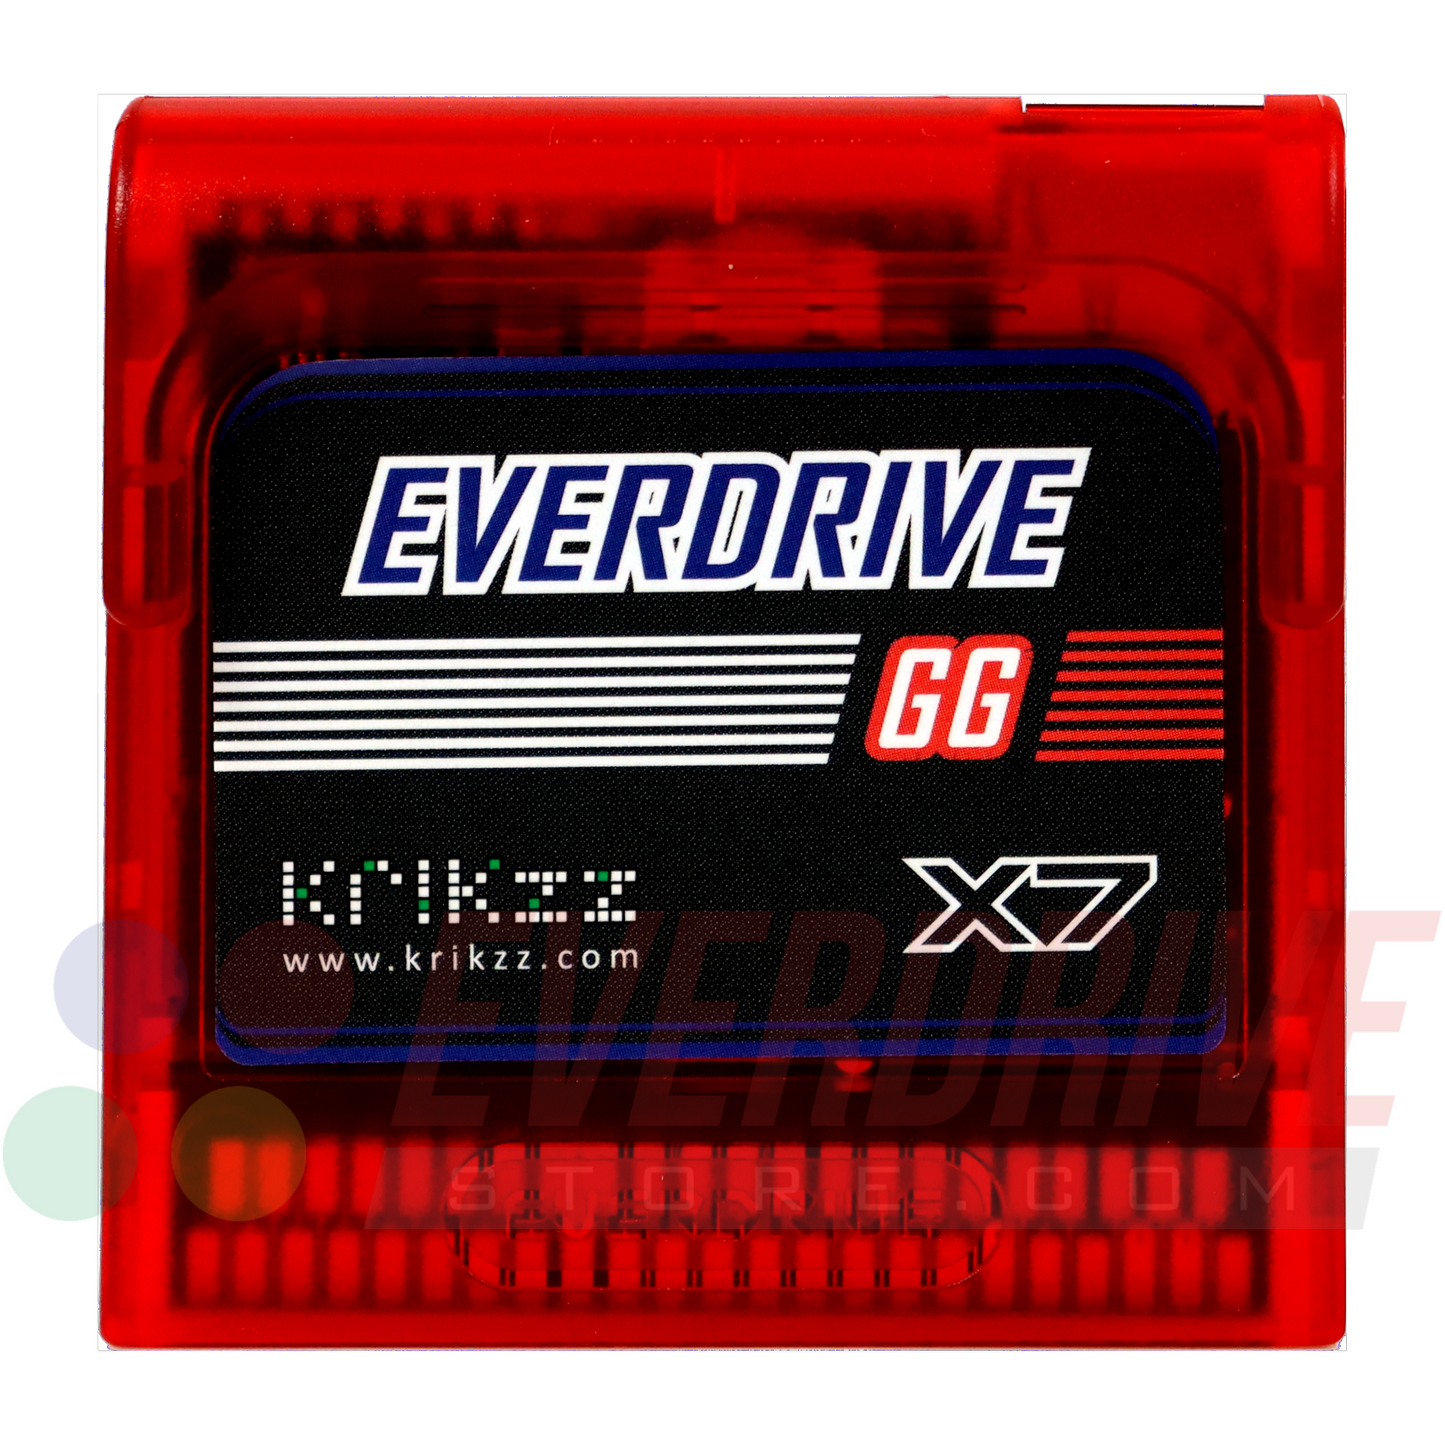 Everdrive GG X7 - Frosted Red